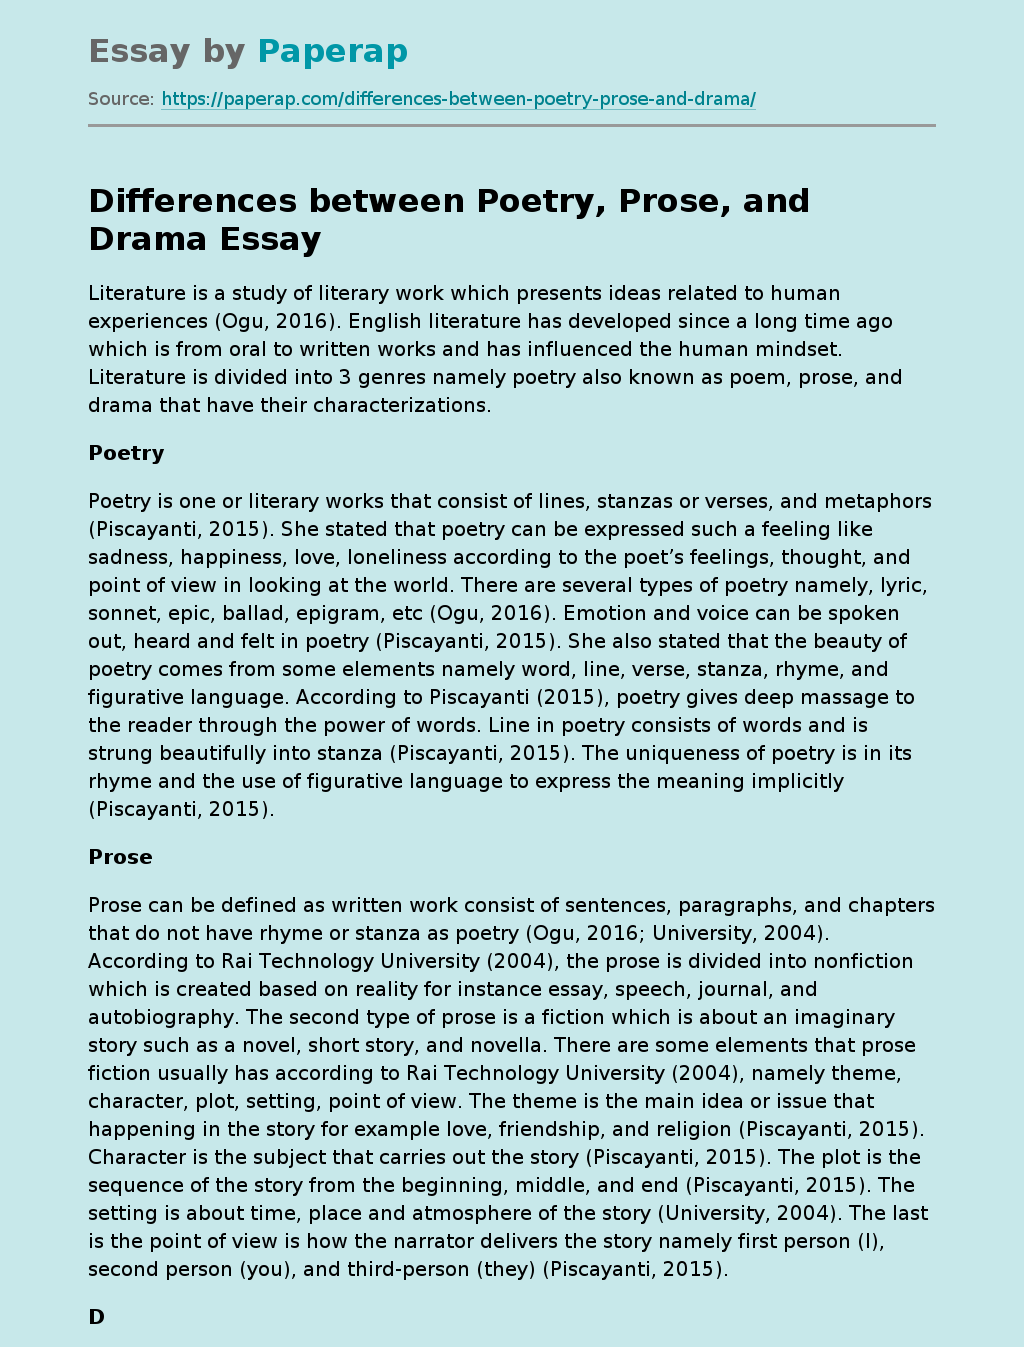 Differences between Poetry, Prose, and Drama